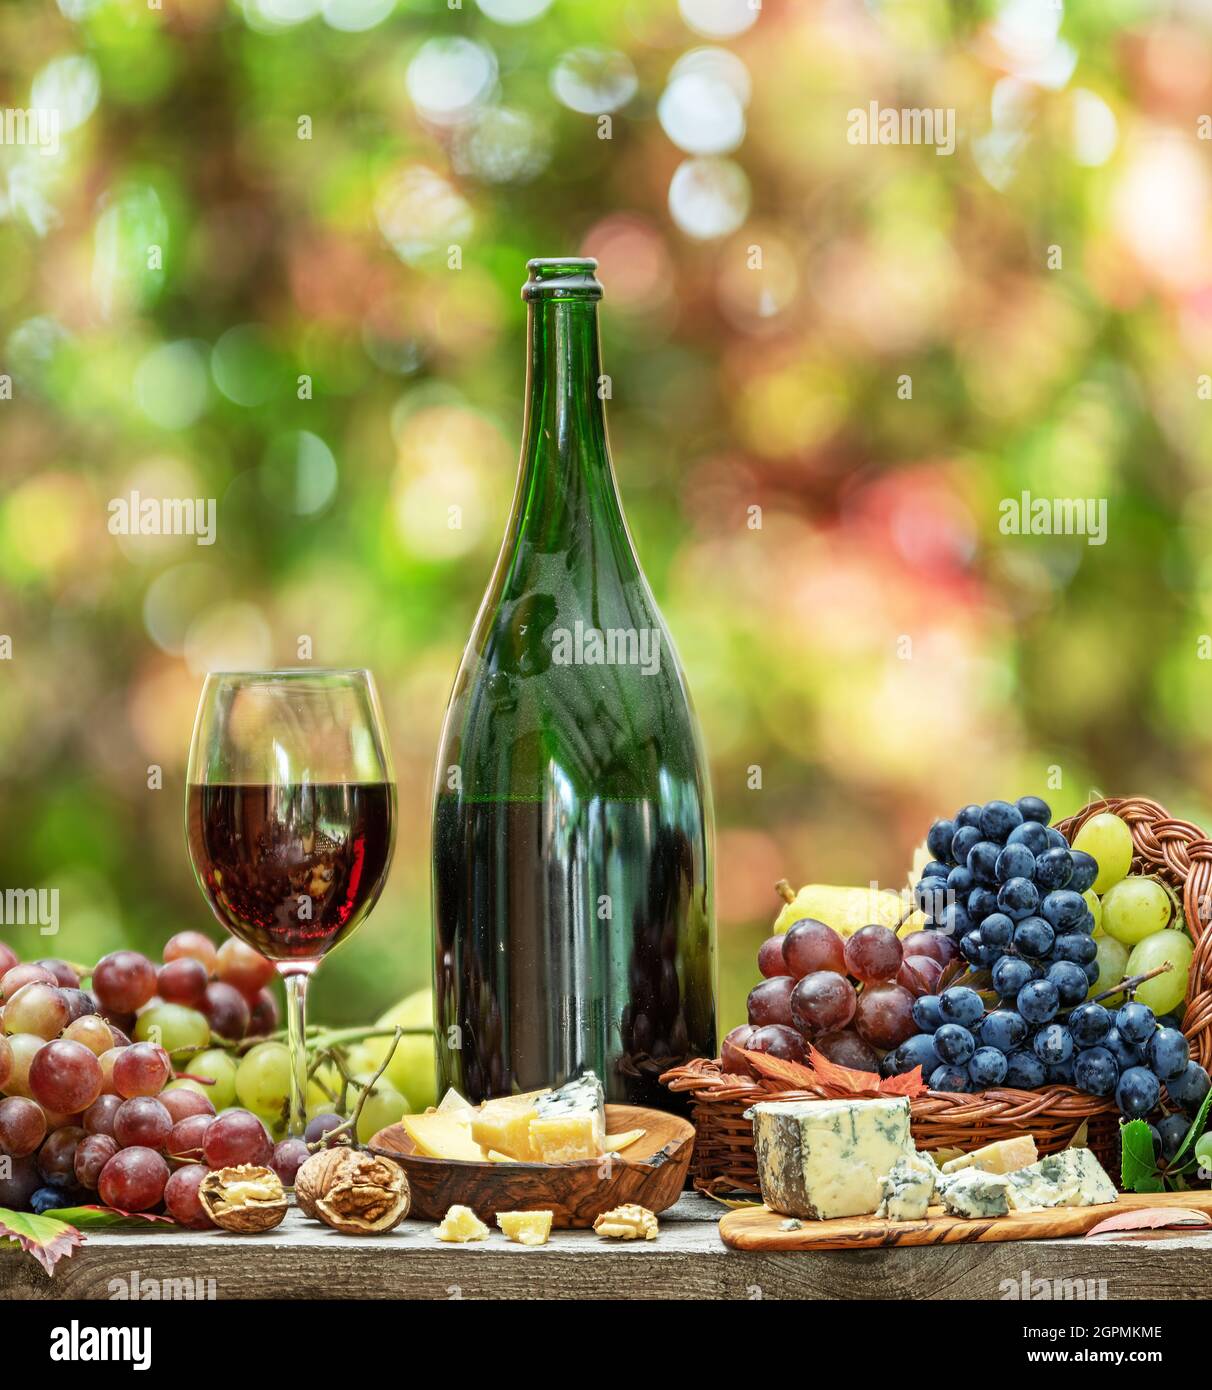 Grapes, bottle of wine and different cheeses on country wooden table and blurred colorful autumn background. Variety of products as the symbol of autu Stock Photo